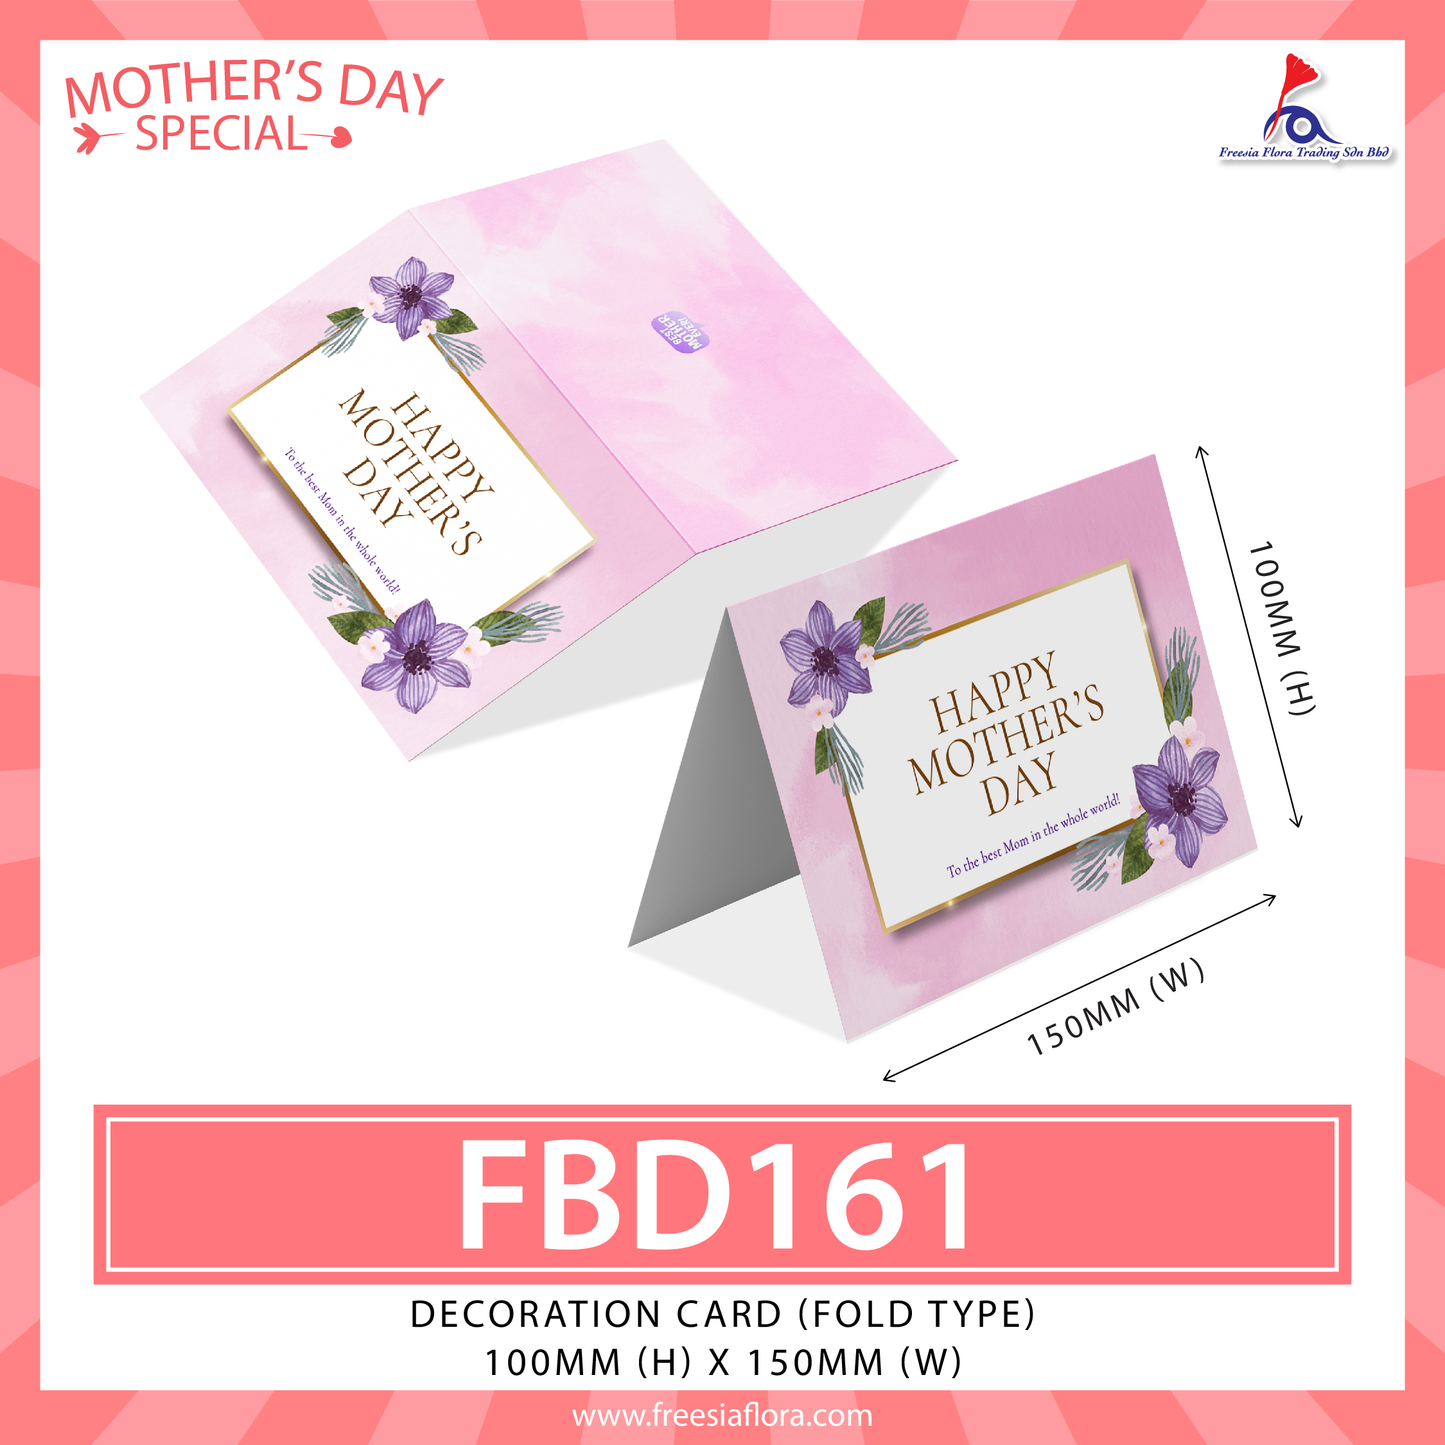 FBD161 Mother's Day Card - HAPPY MOTHER'S DAY (Folded Type)